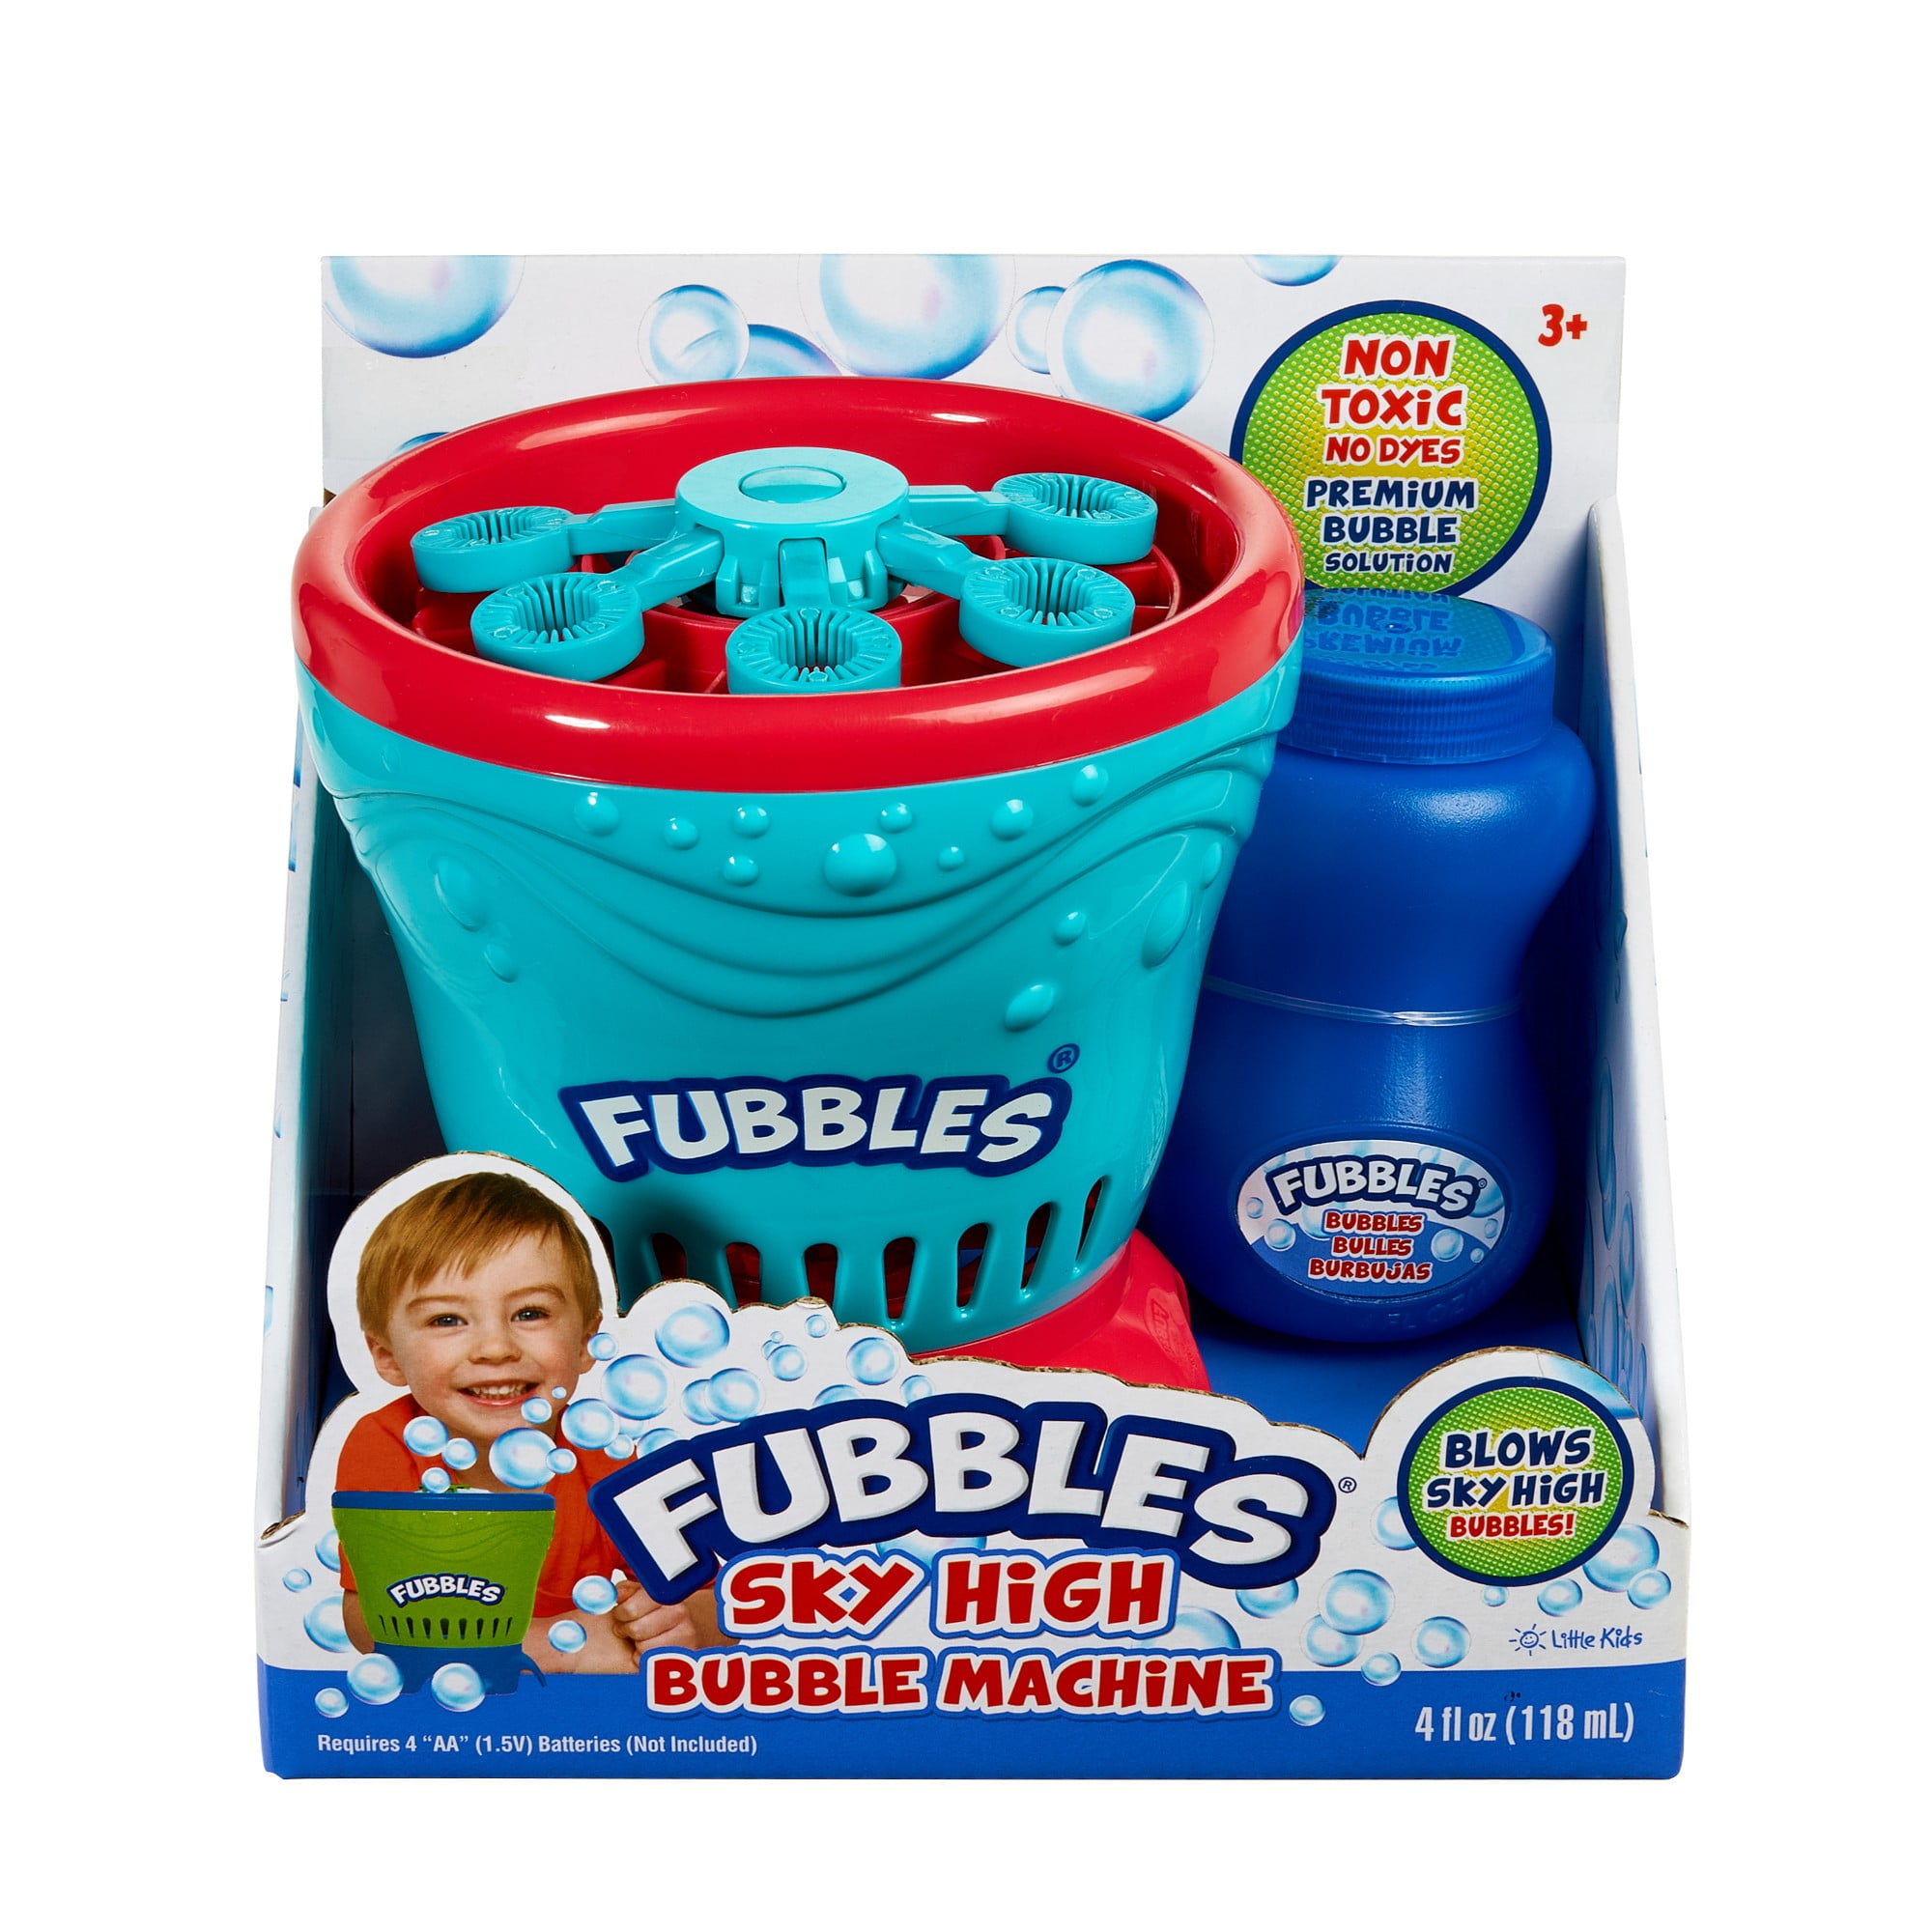 Bubbletastic Bubble BBQ Blower Machine and Bubble Solution Amazing Kids Toy Gift 